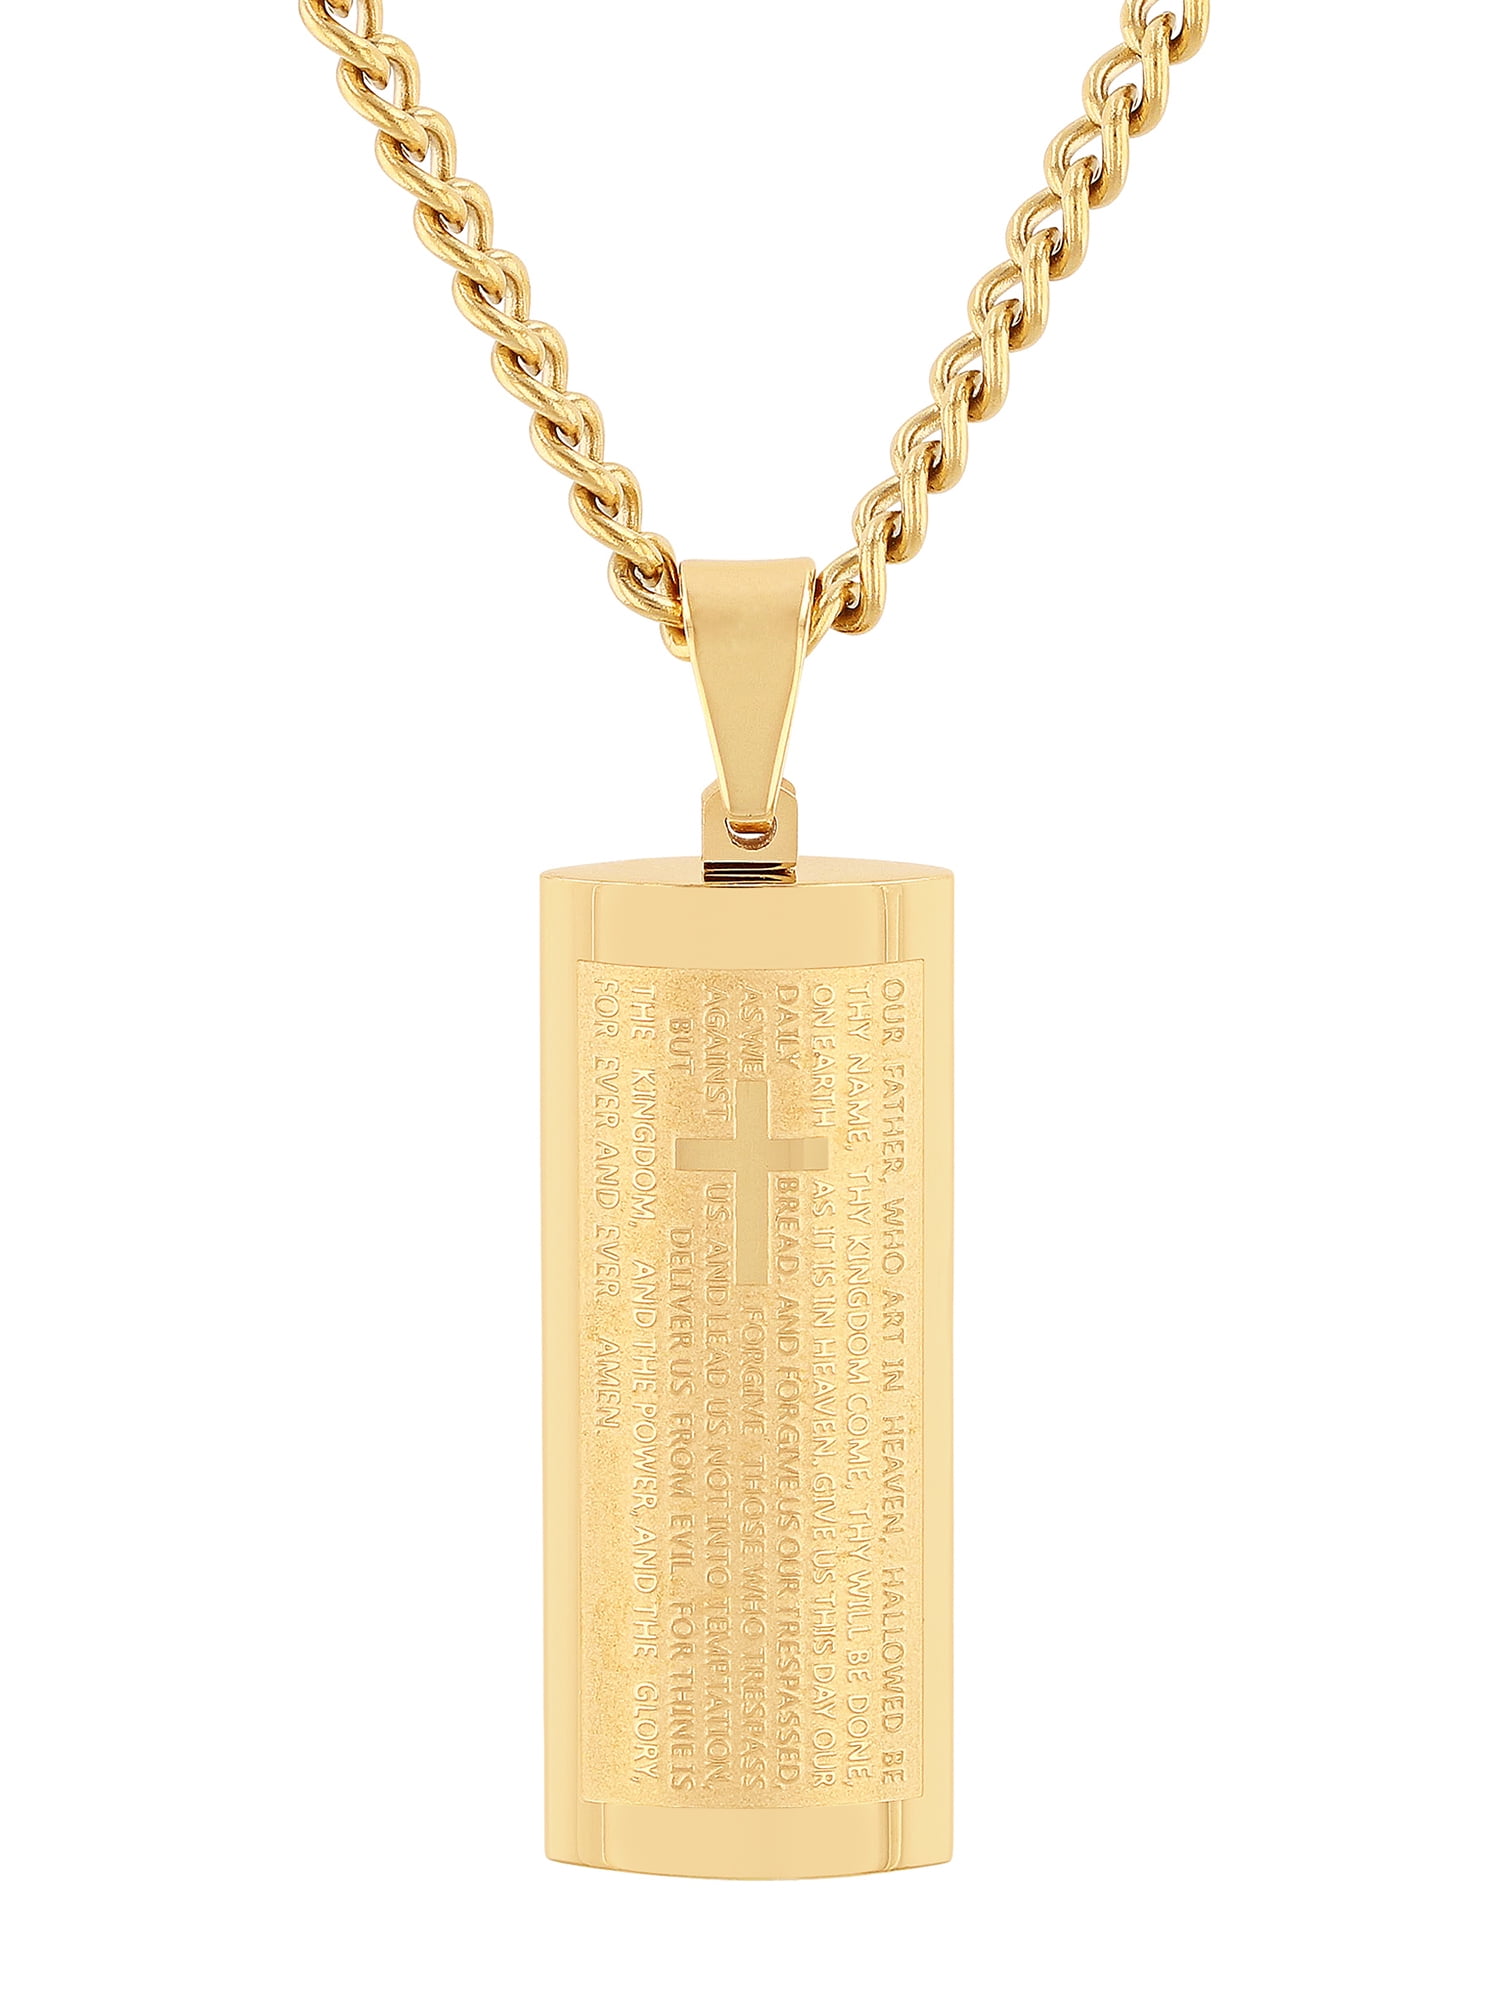 Believe by Brilliance Mens Gold-Tone Stainless Steel The Lord's Prayer Pendant Necklace